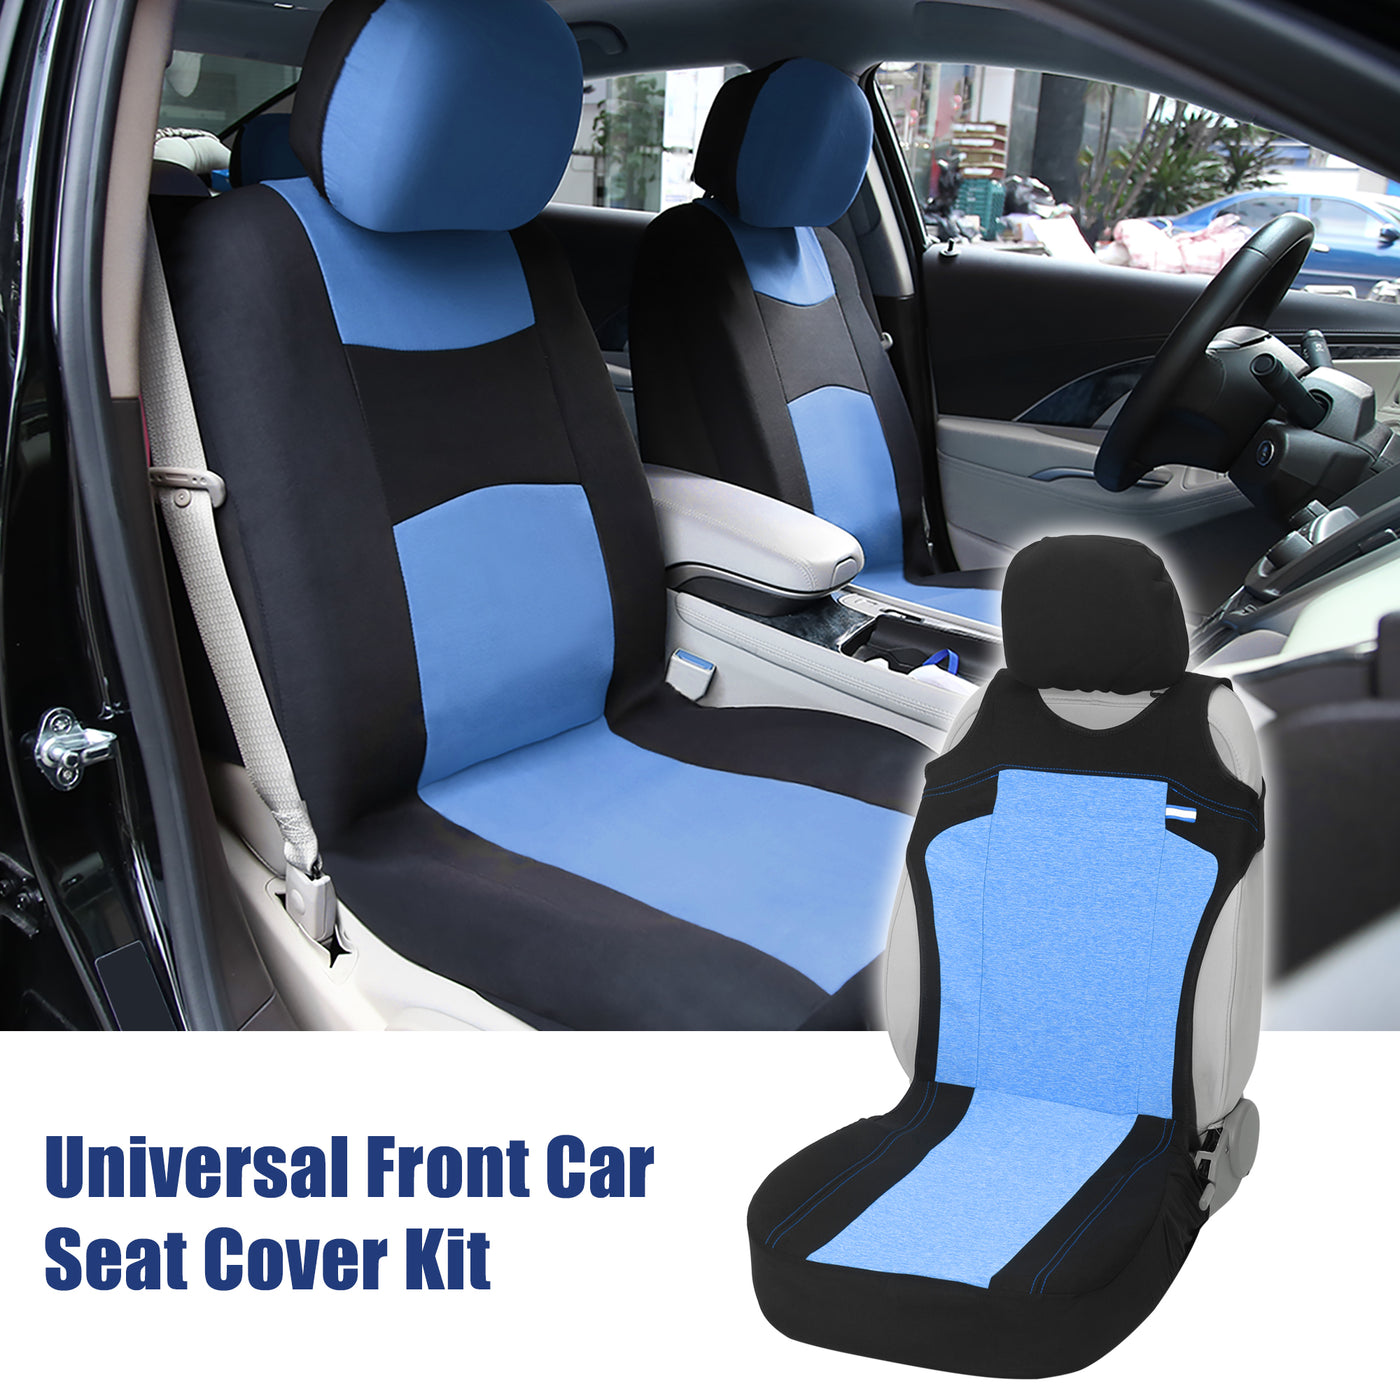 X AUTOHAUX Universal Front Car Seat Cover Kit Cloth Fabric Seat Protector Pad Fit for Car Truck SUV Blue